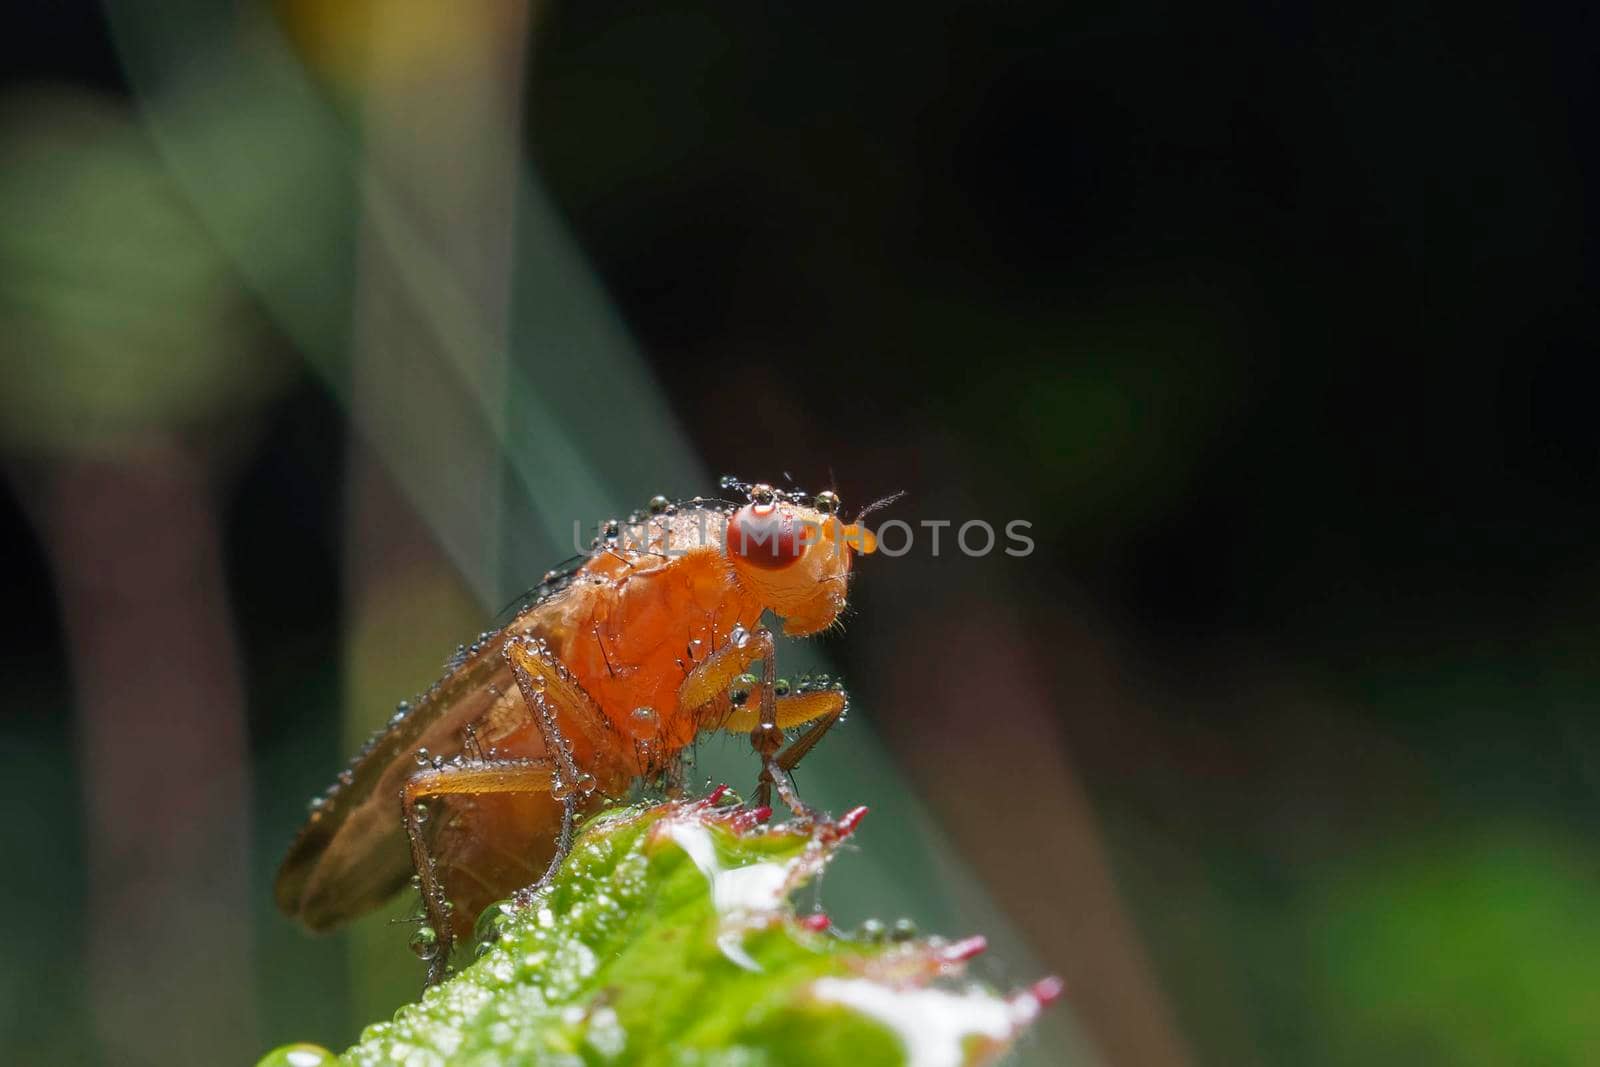 A marsh fly on a leaf covered in water droplets.